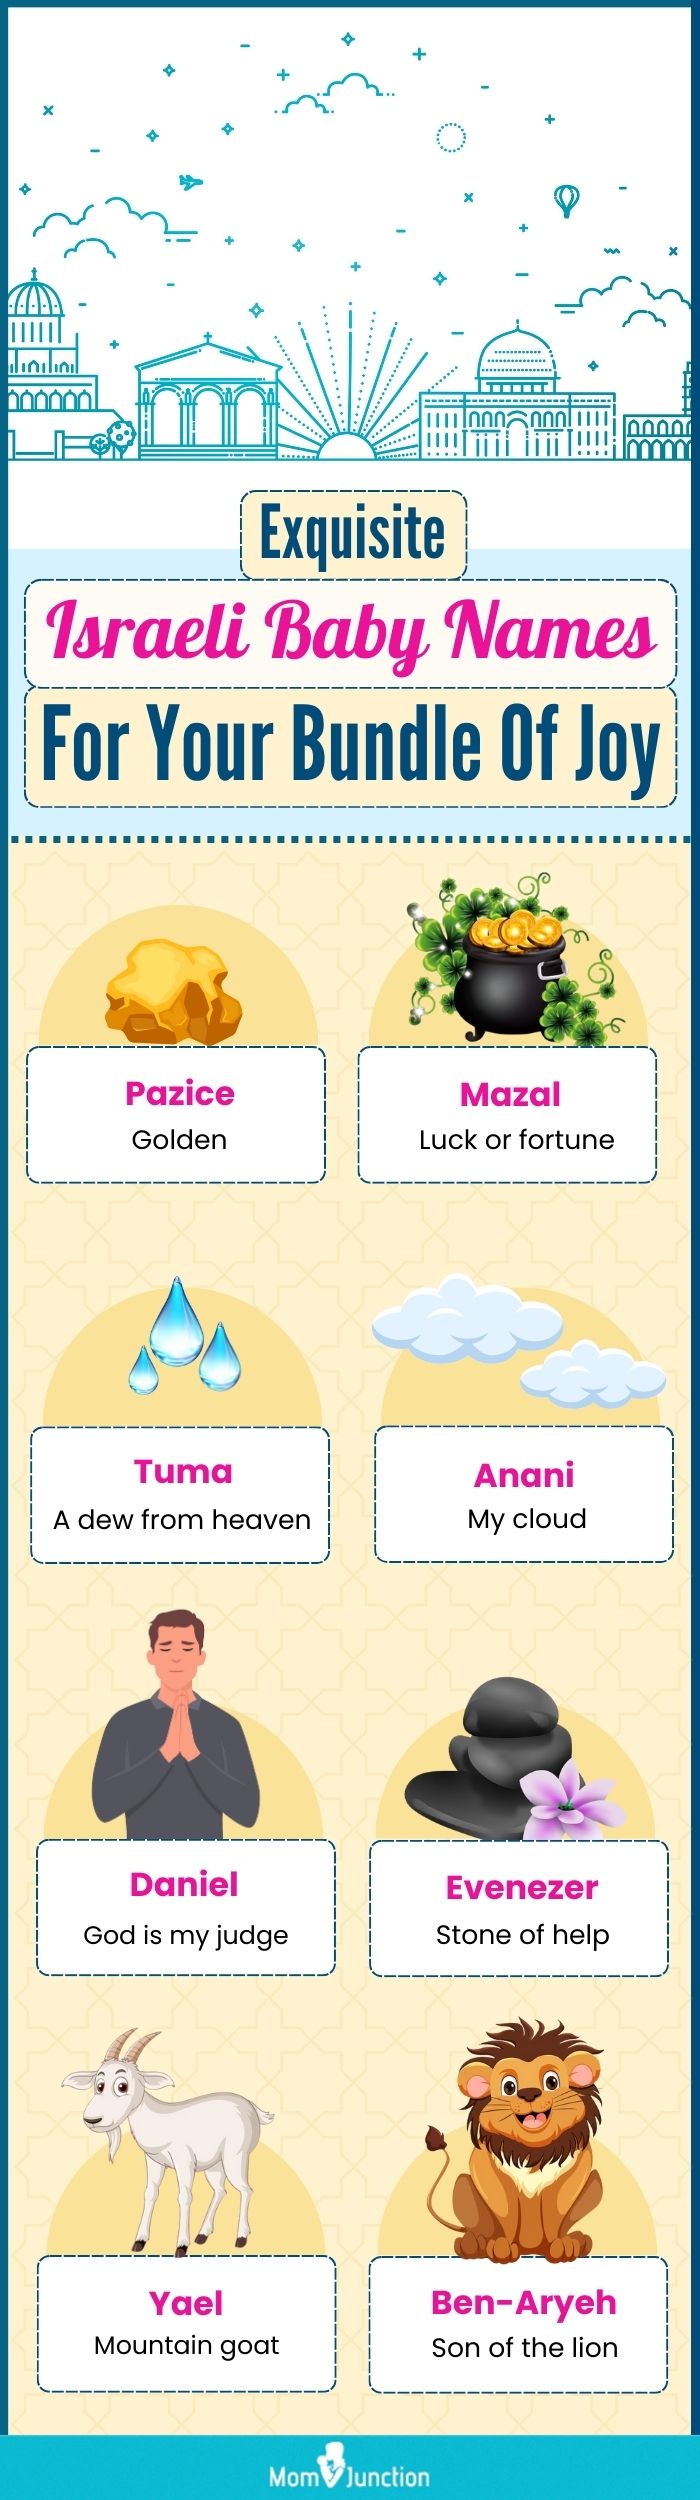 exquisite israieli baby names for your bundle of joy (infographic)